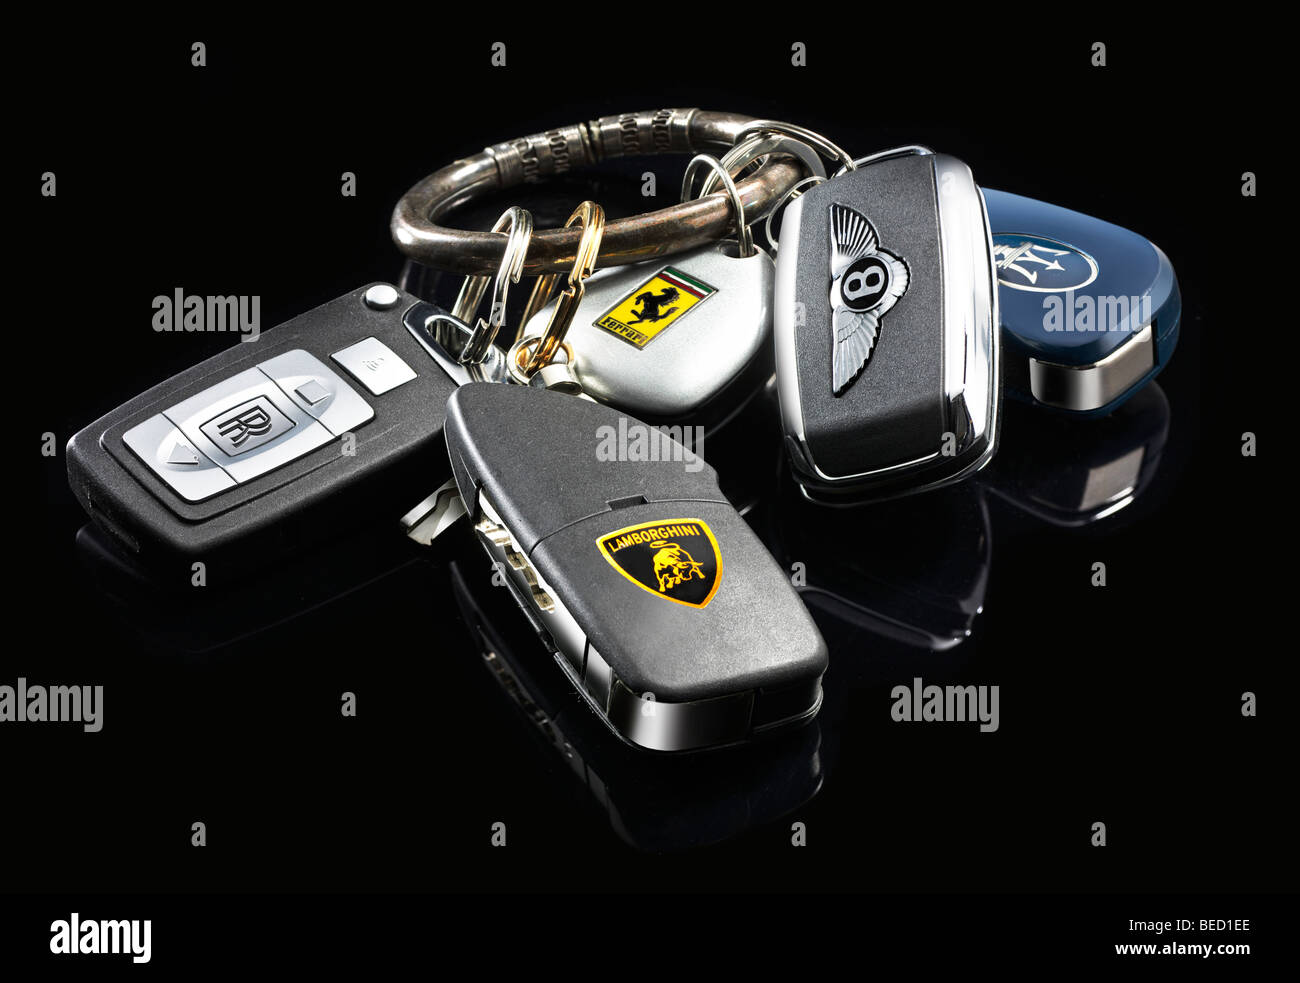 Car keys of various high-class brands on an antique key ring Stock Photo